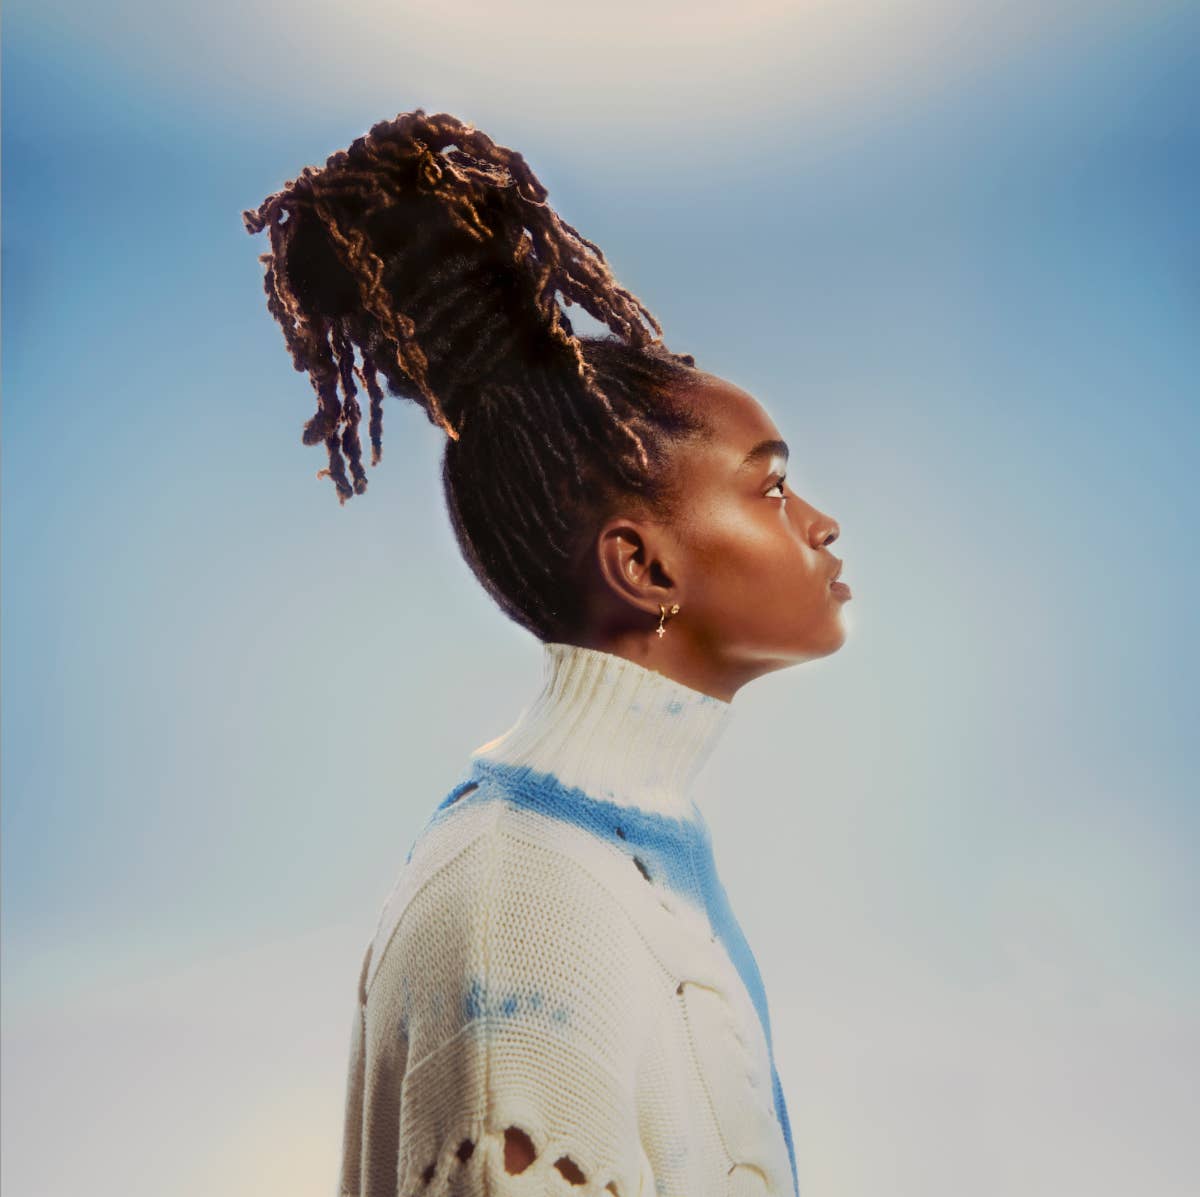 Album art for Koffee's 'Gifted'